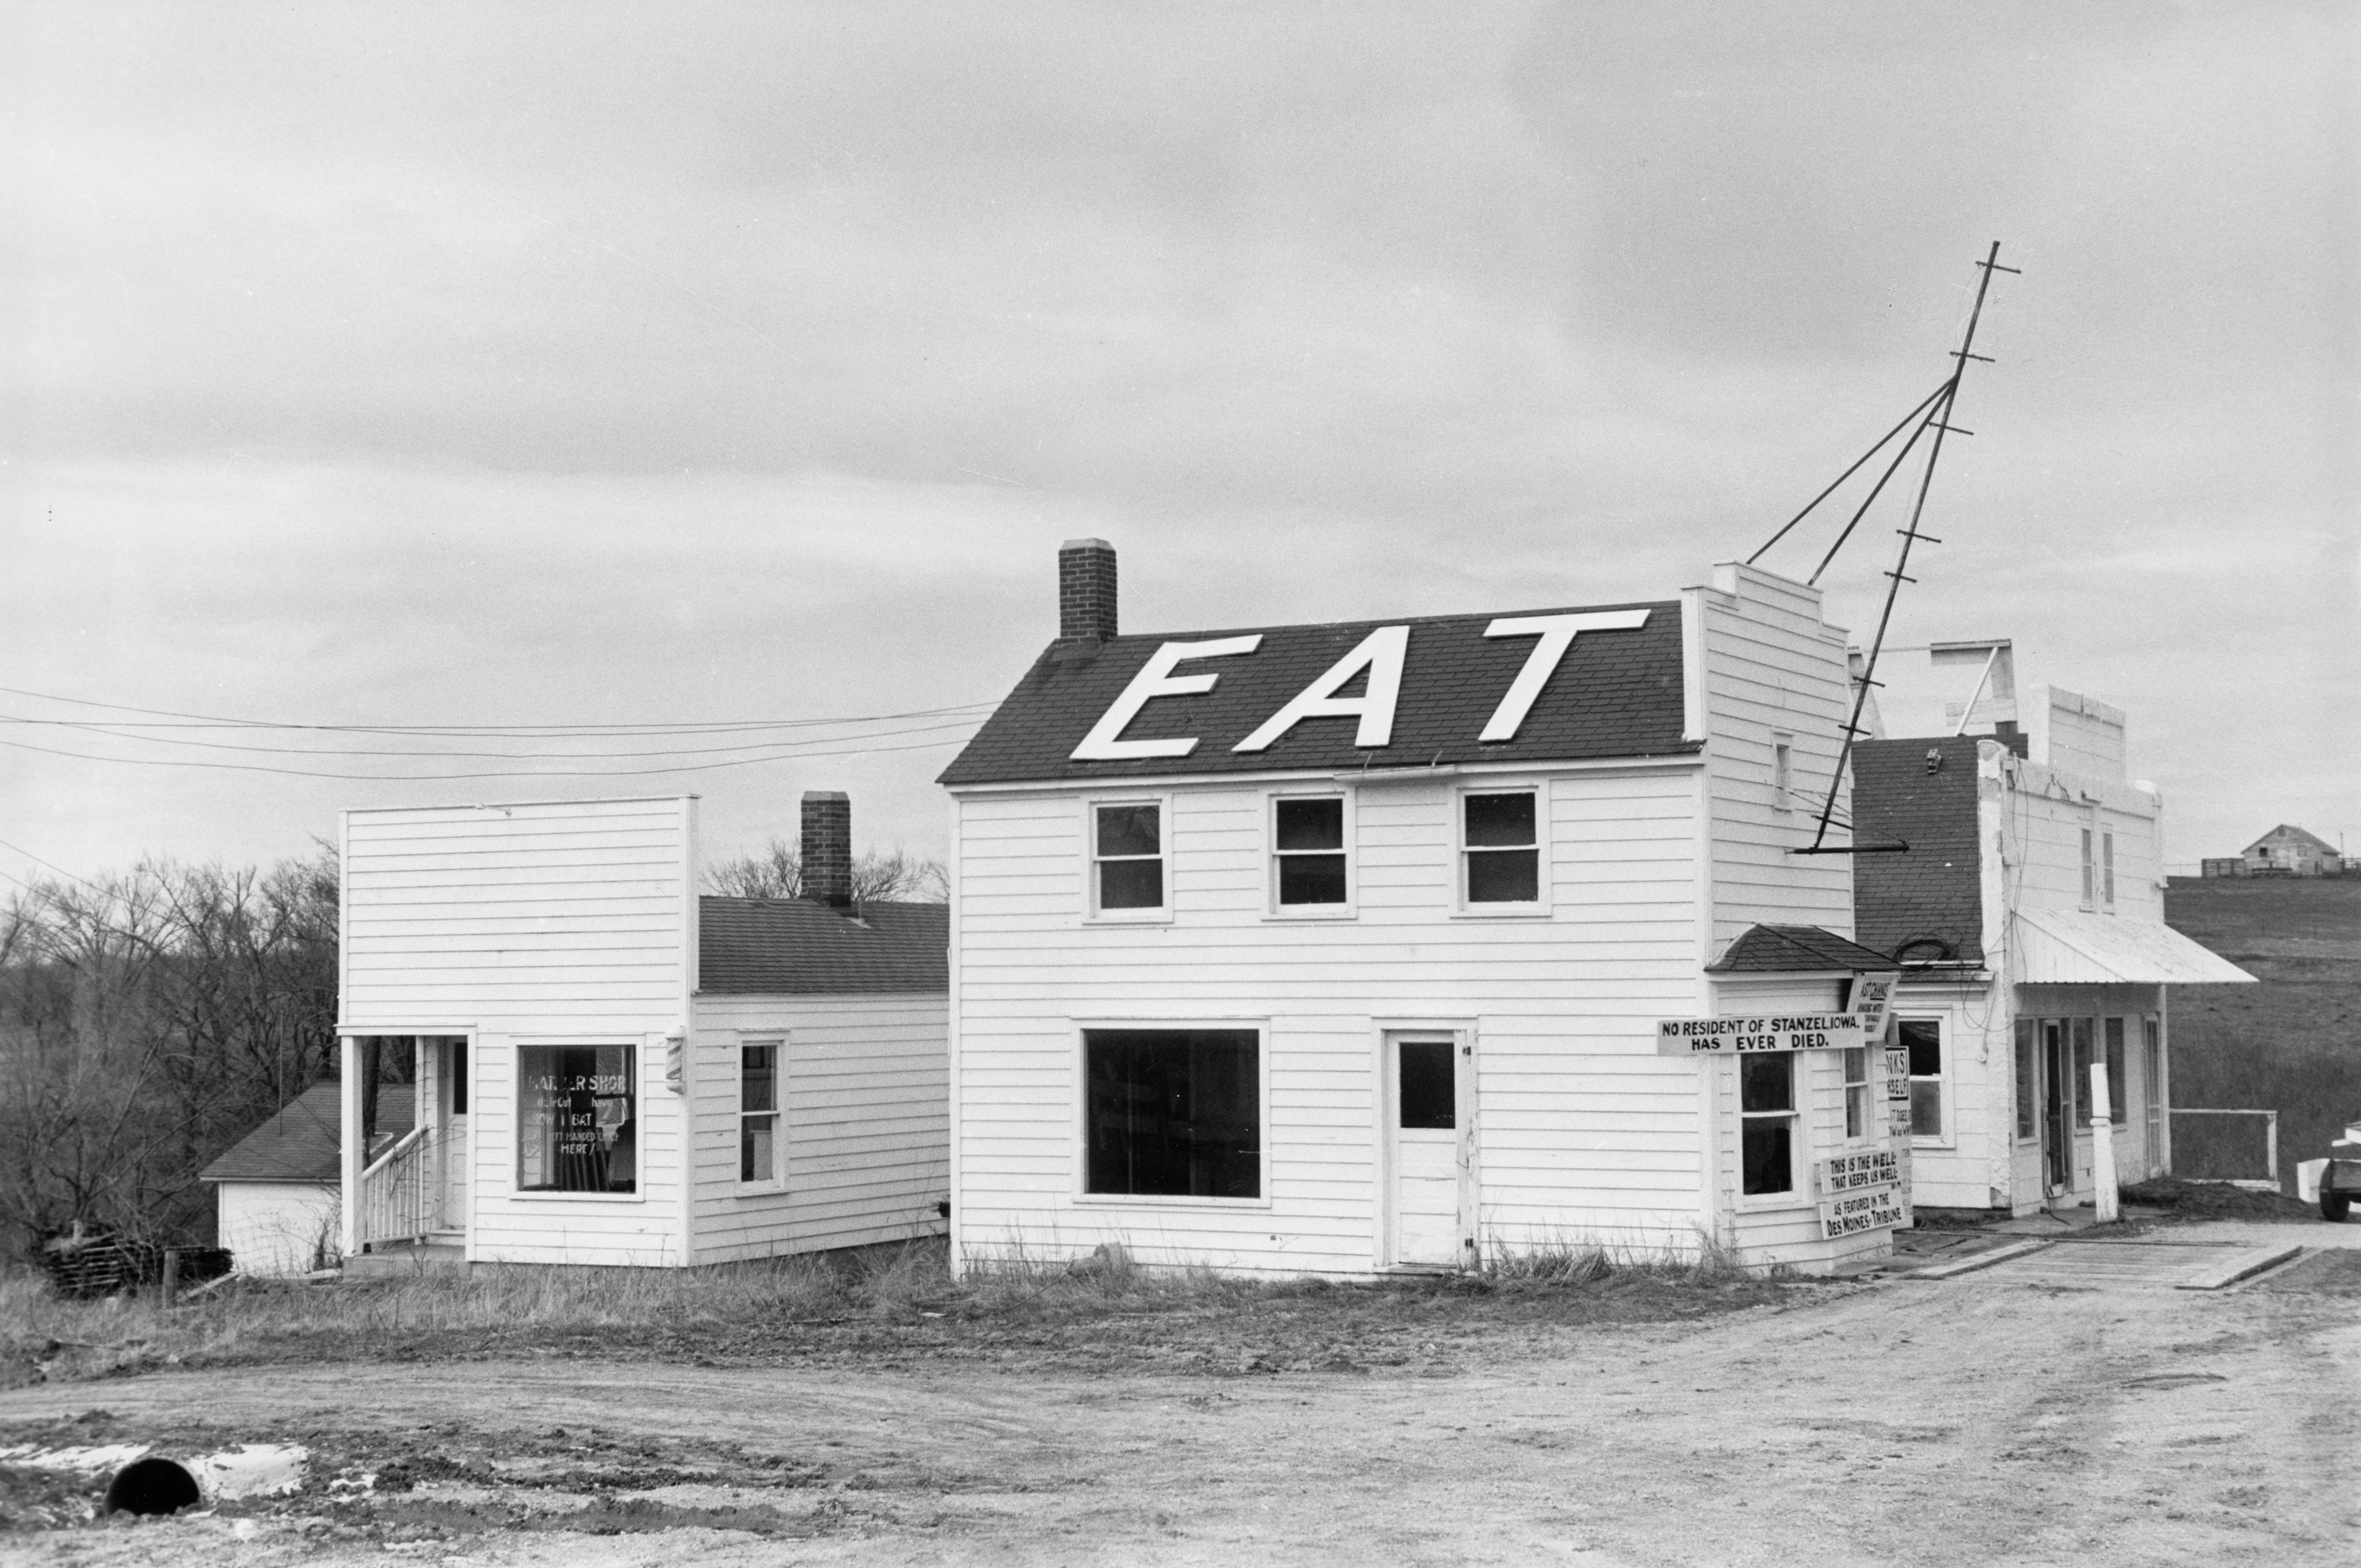 Black and white photograph of a rural two story building with the word 'eat' in large white letters on its roof.